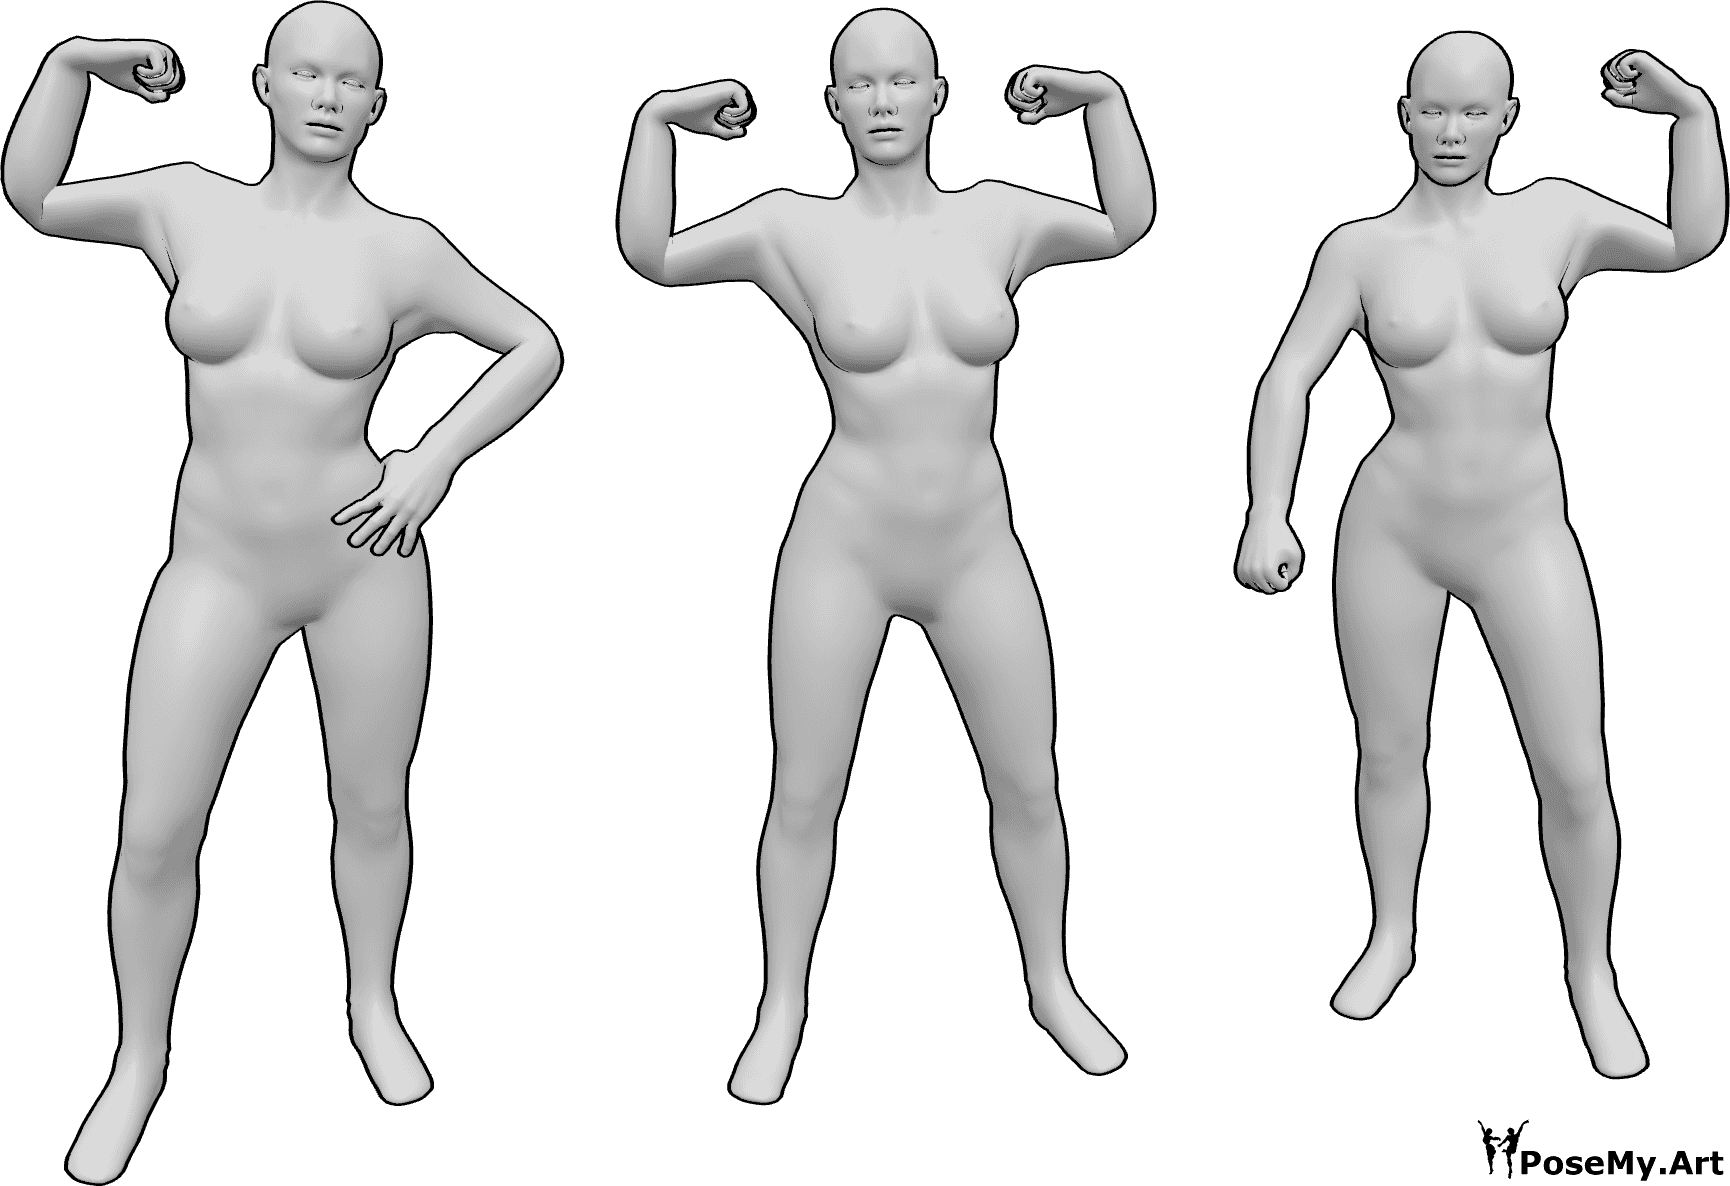 Pose Reference - Muscular females standing pose - Three females are standing and showing their muscles